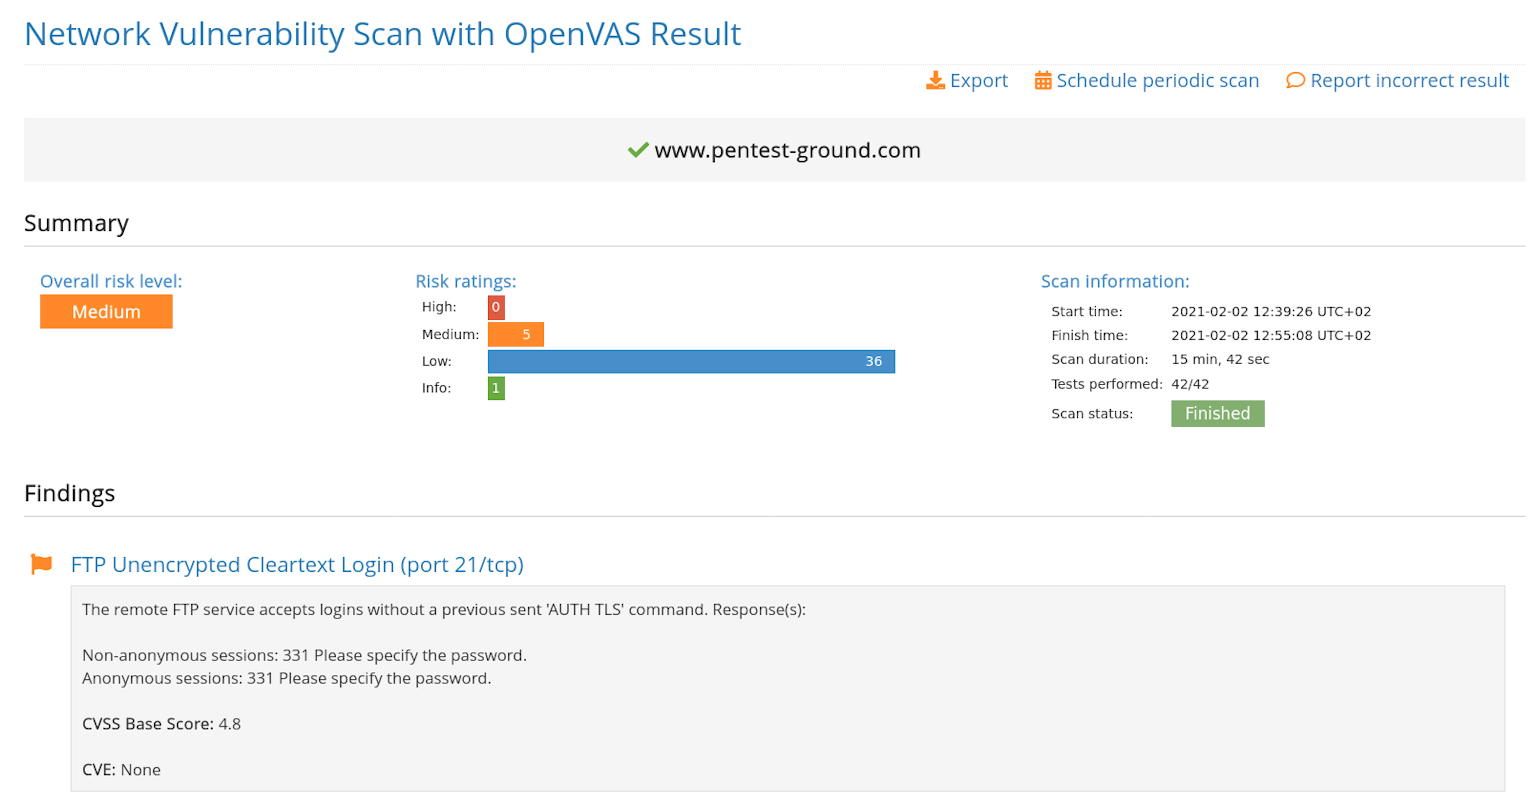 Network Vulnerability Scanner with OpenVAS results